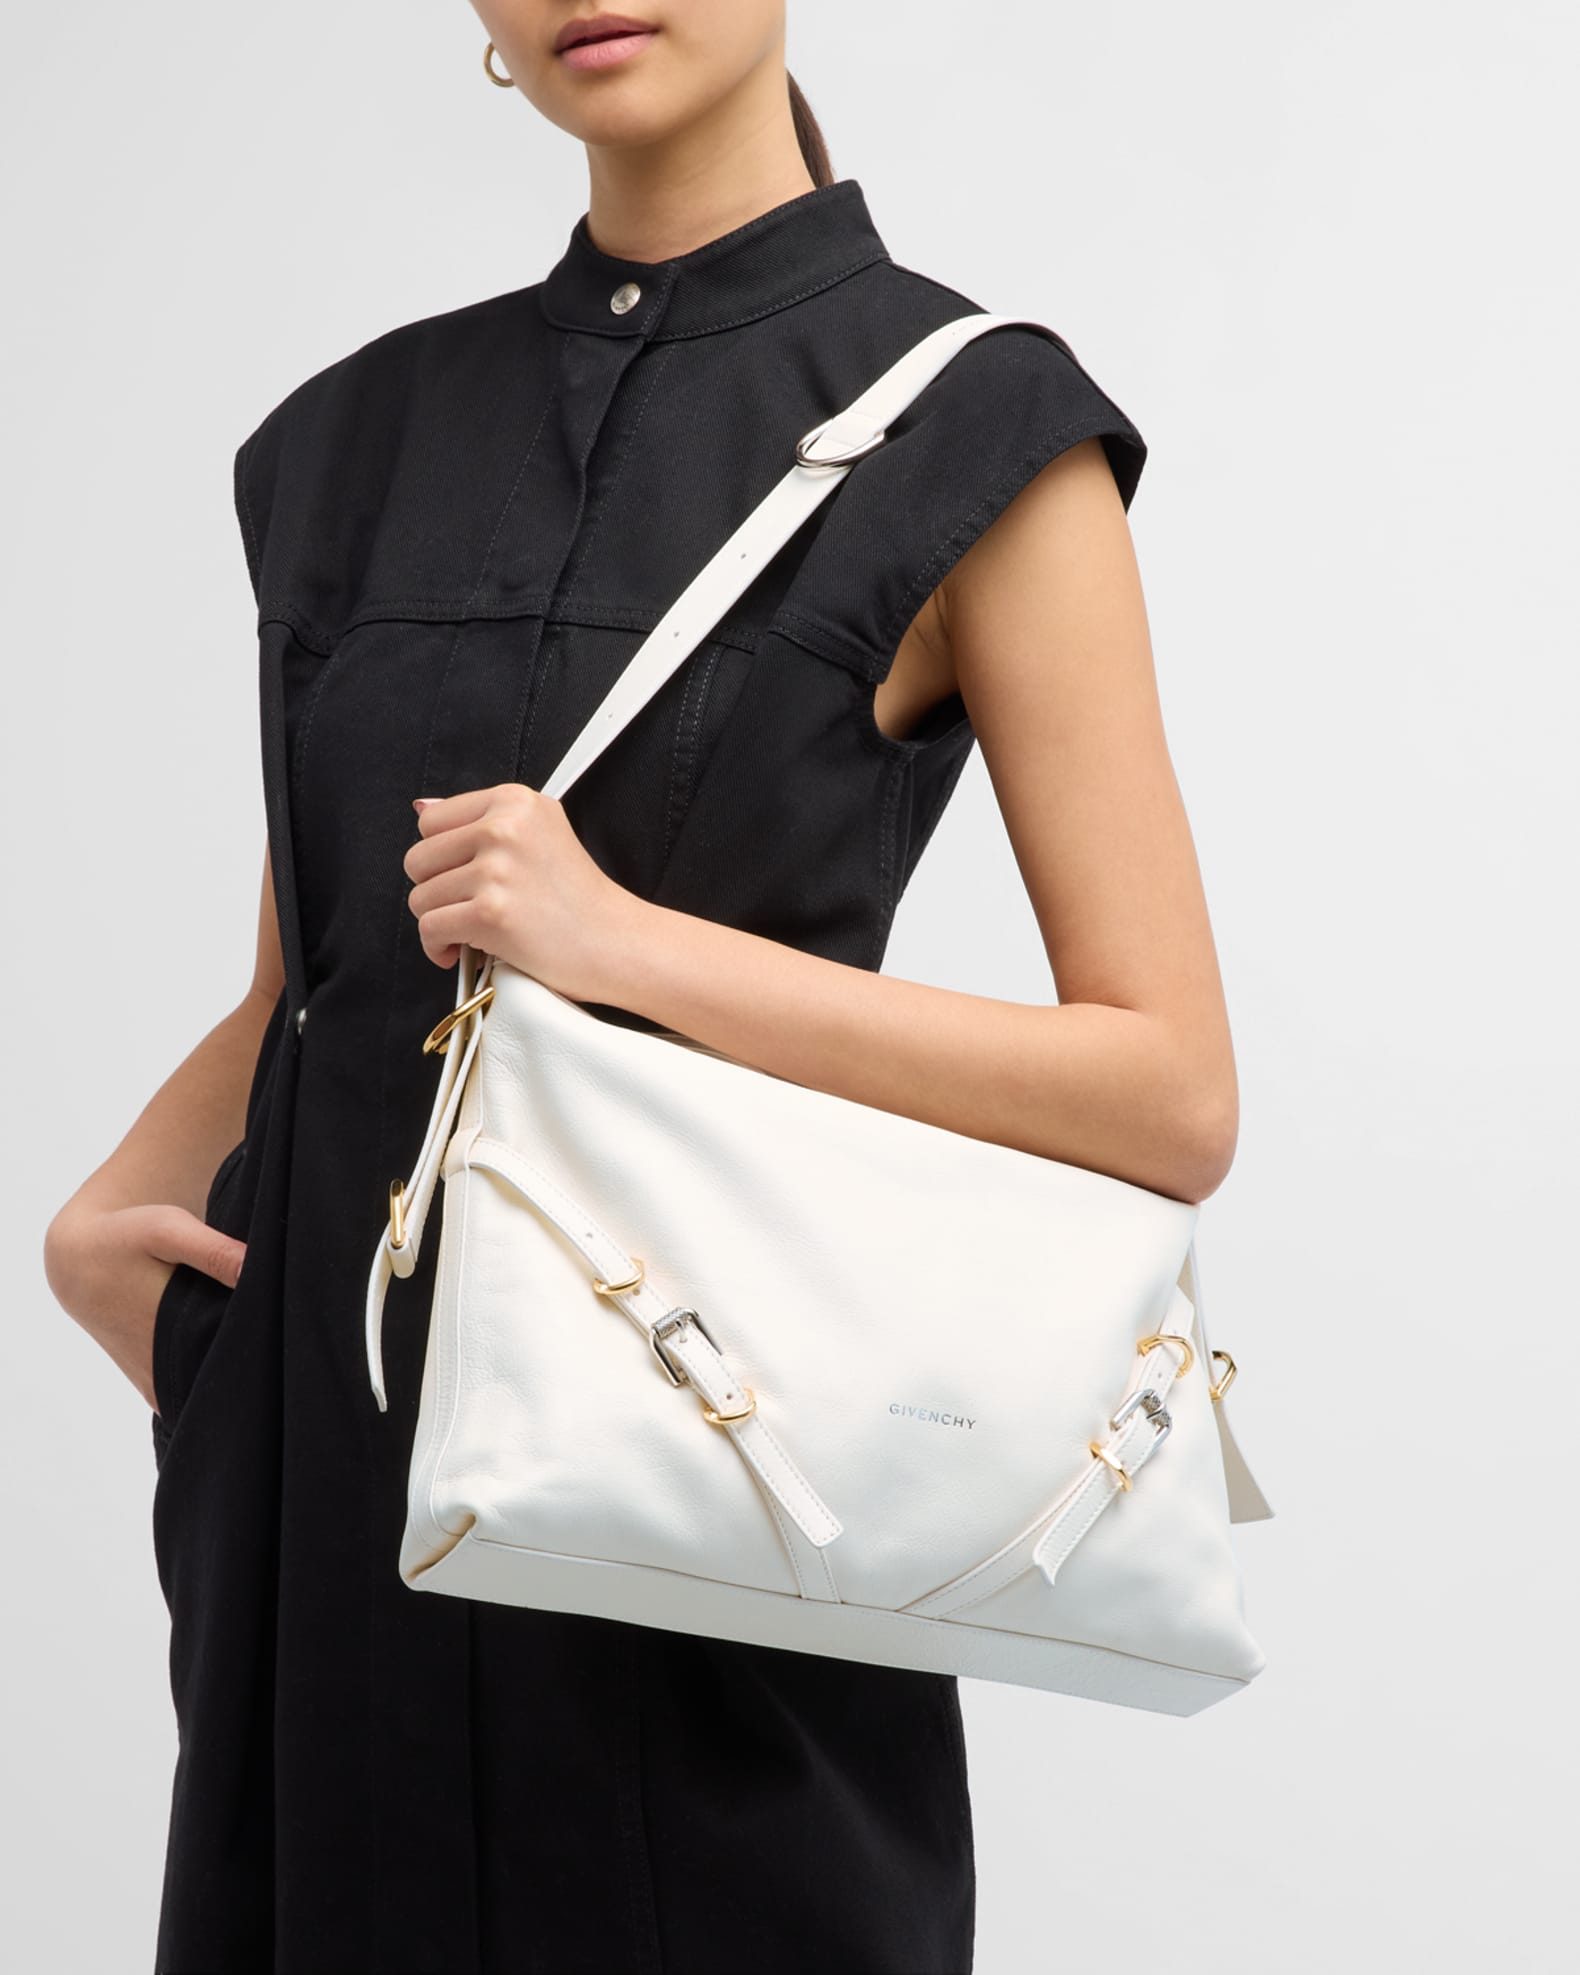 Givenchy Voyou Medium Shoulder Bag in Tumbled Leather | Neiman Marcus